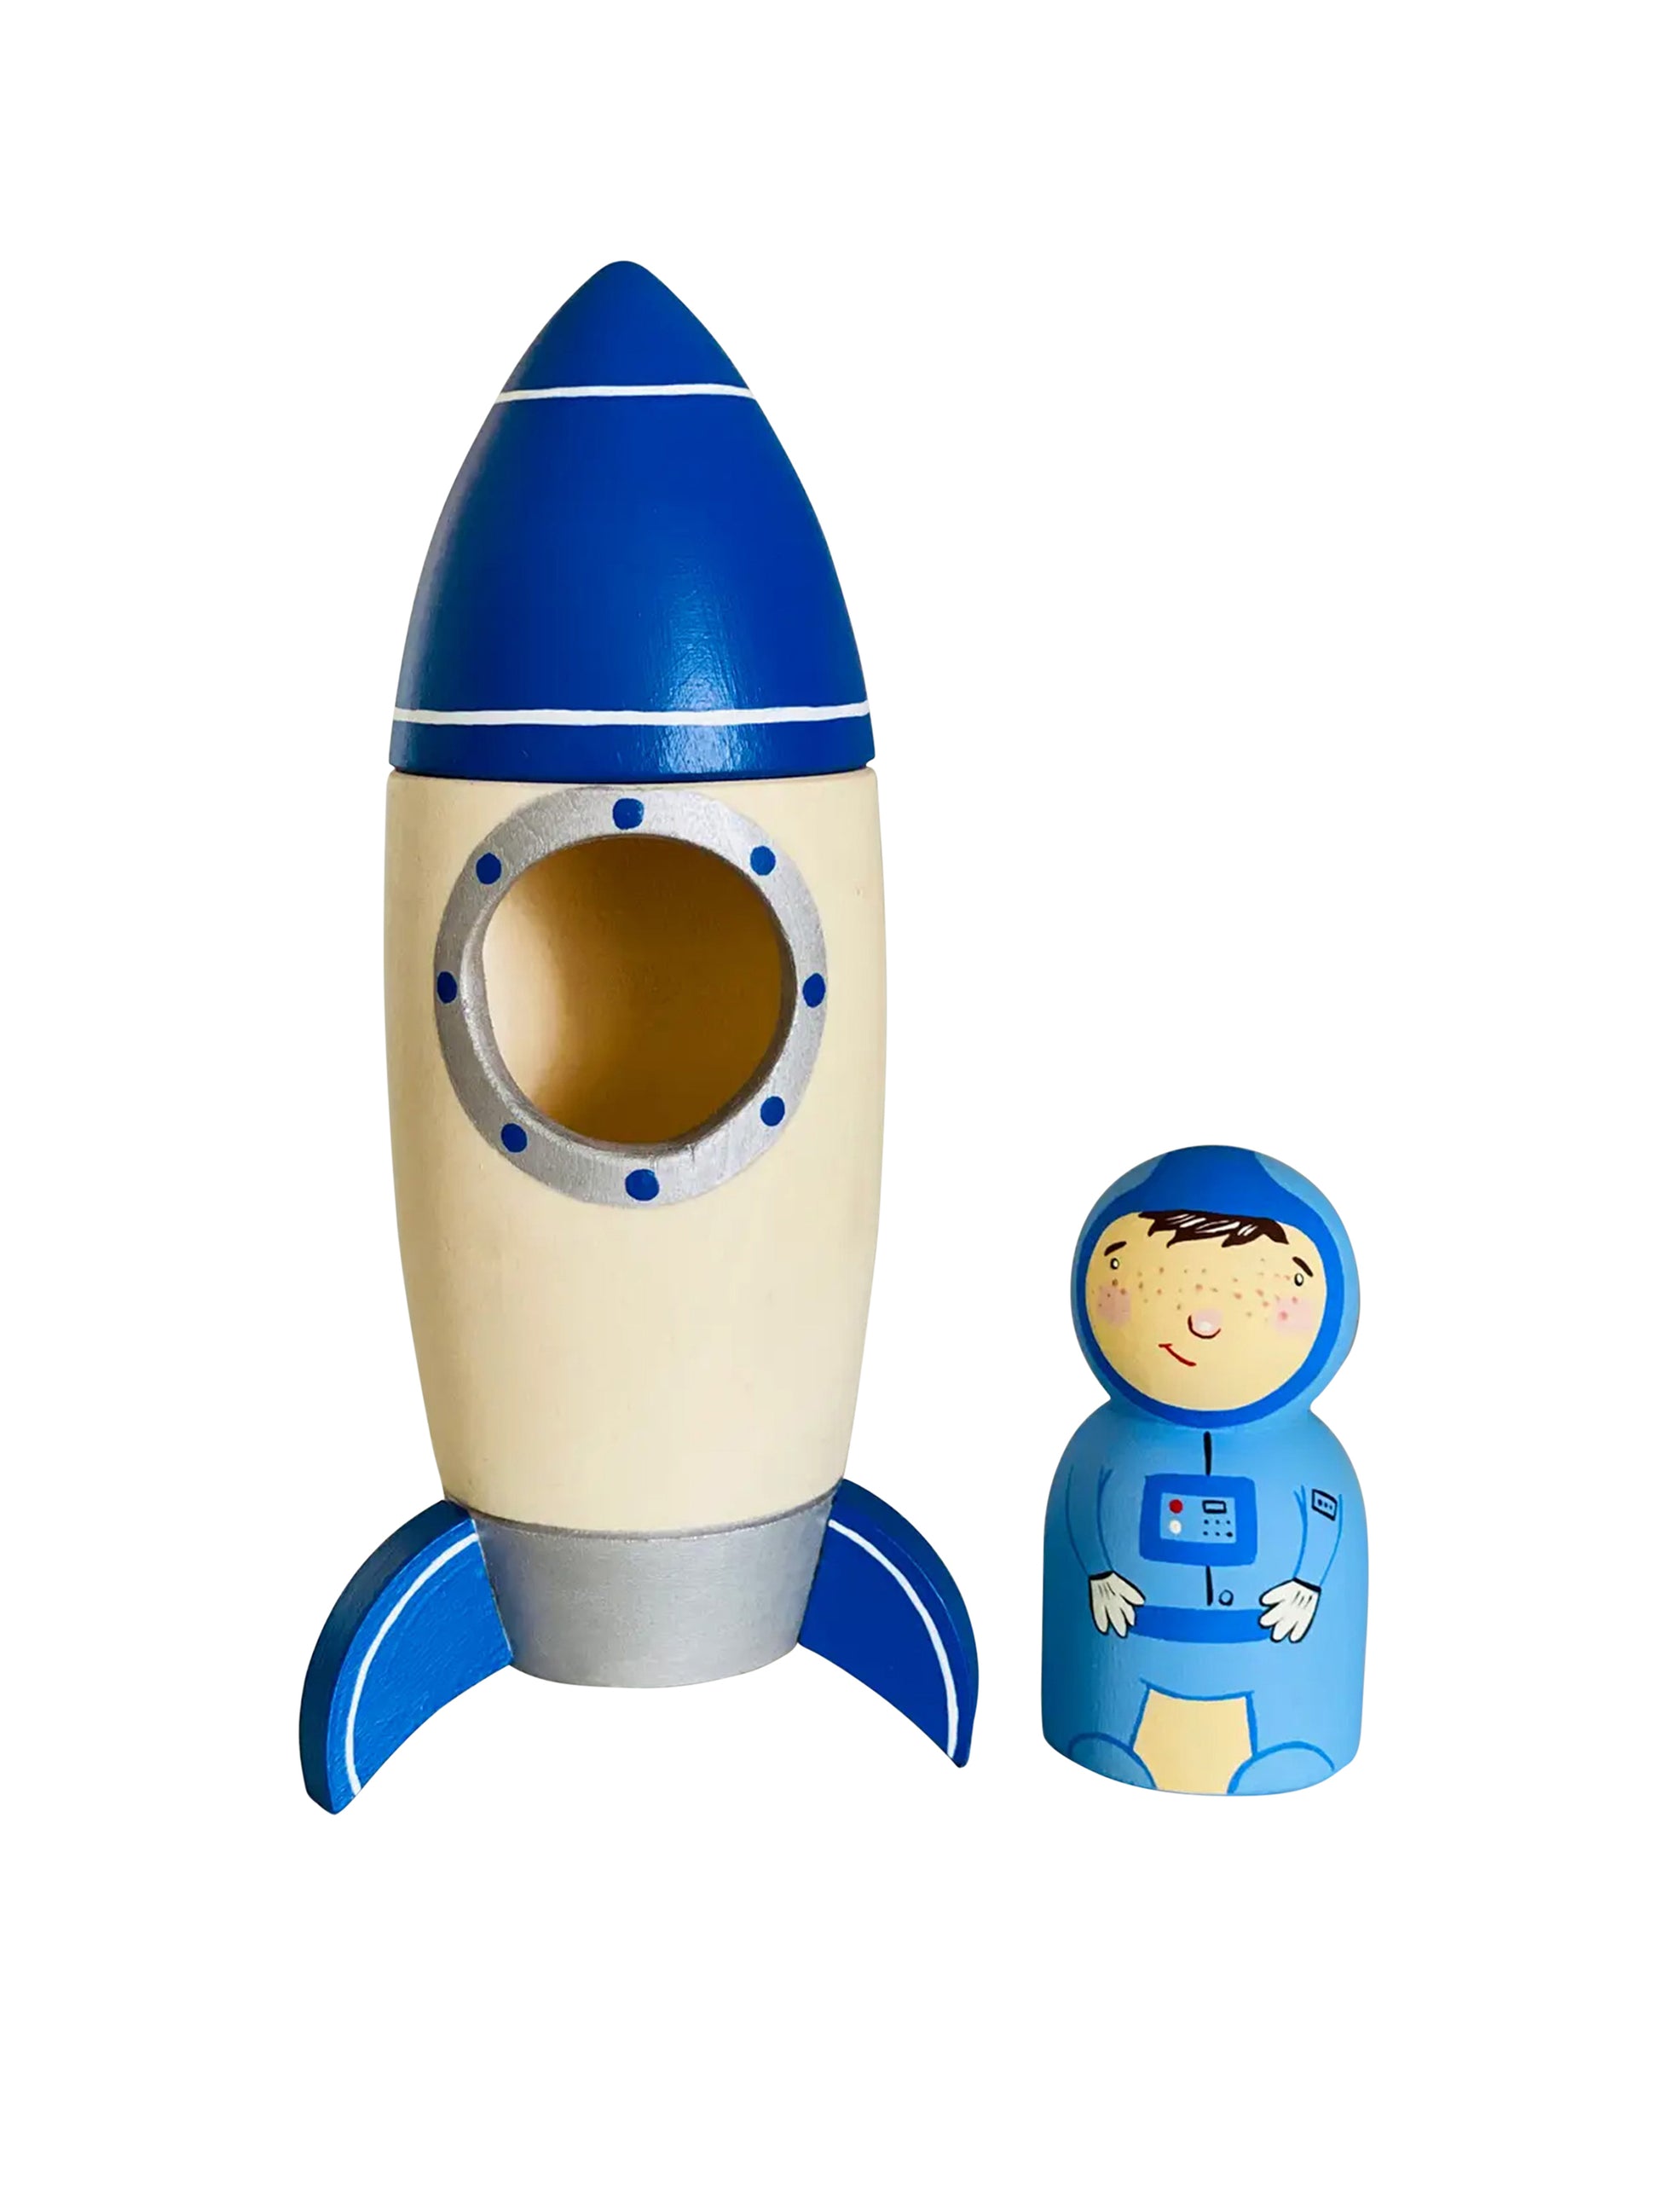 Heirloom Wooden Rocket Ship with Astronaut Blue Weston Table